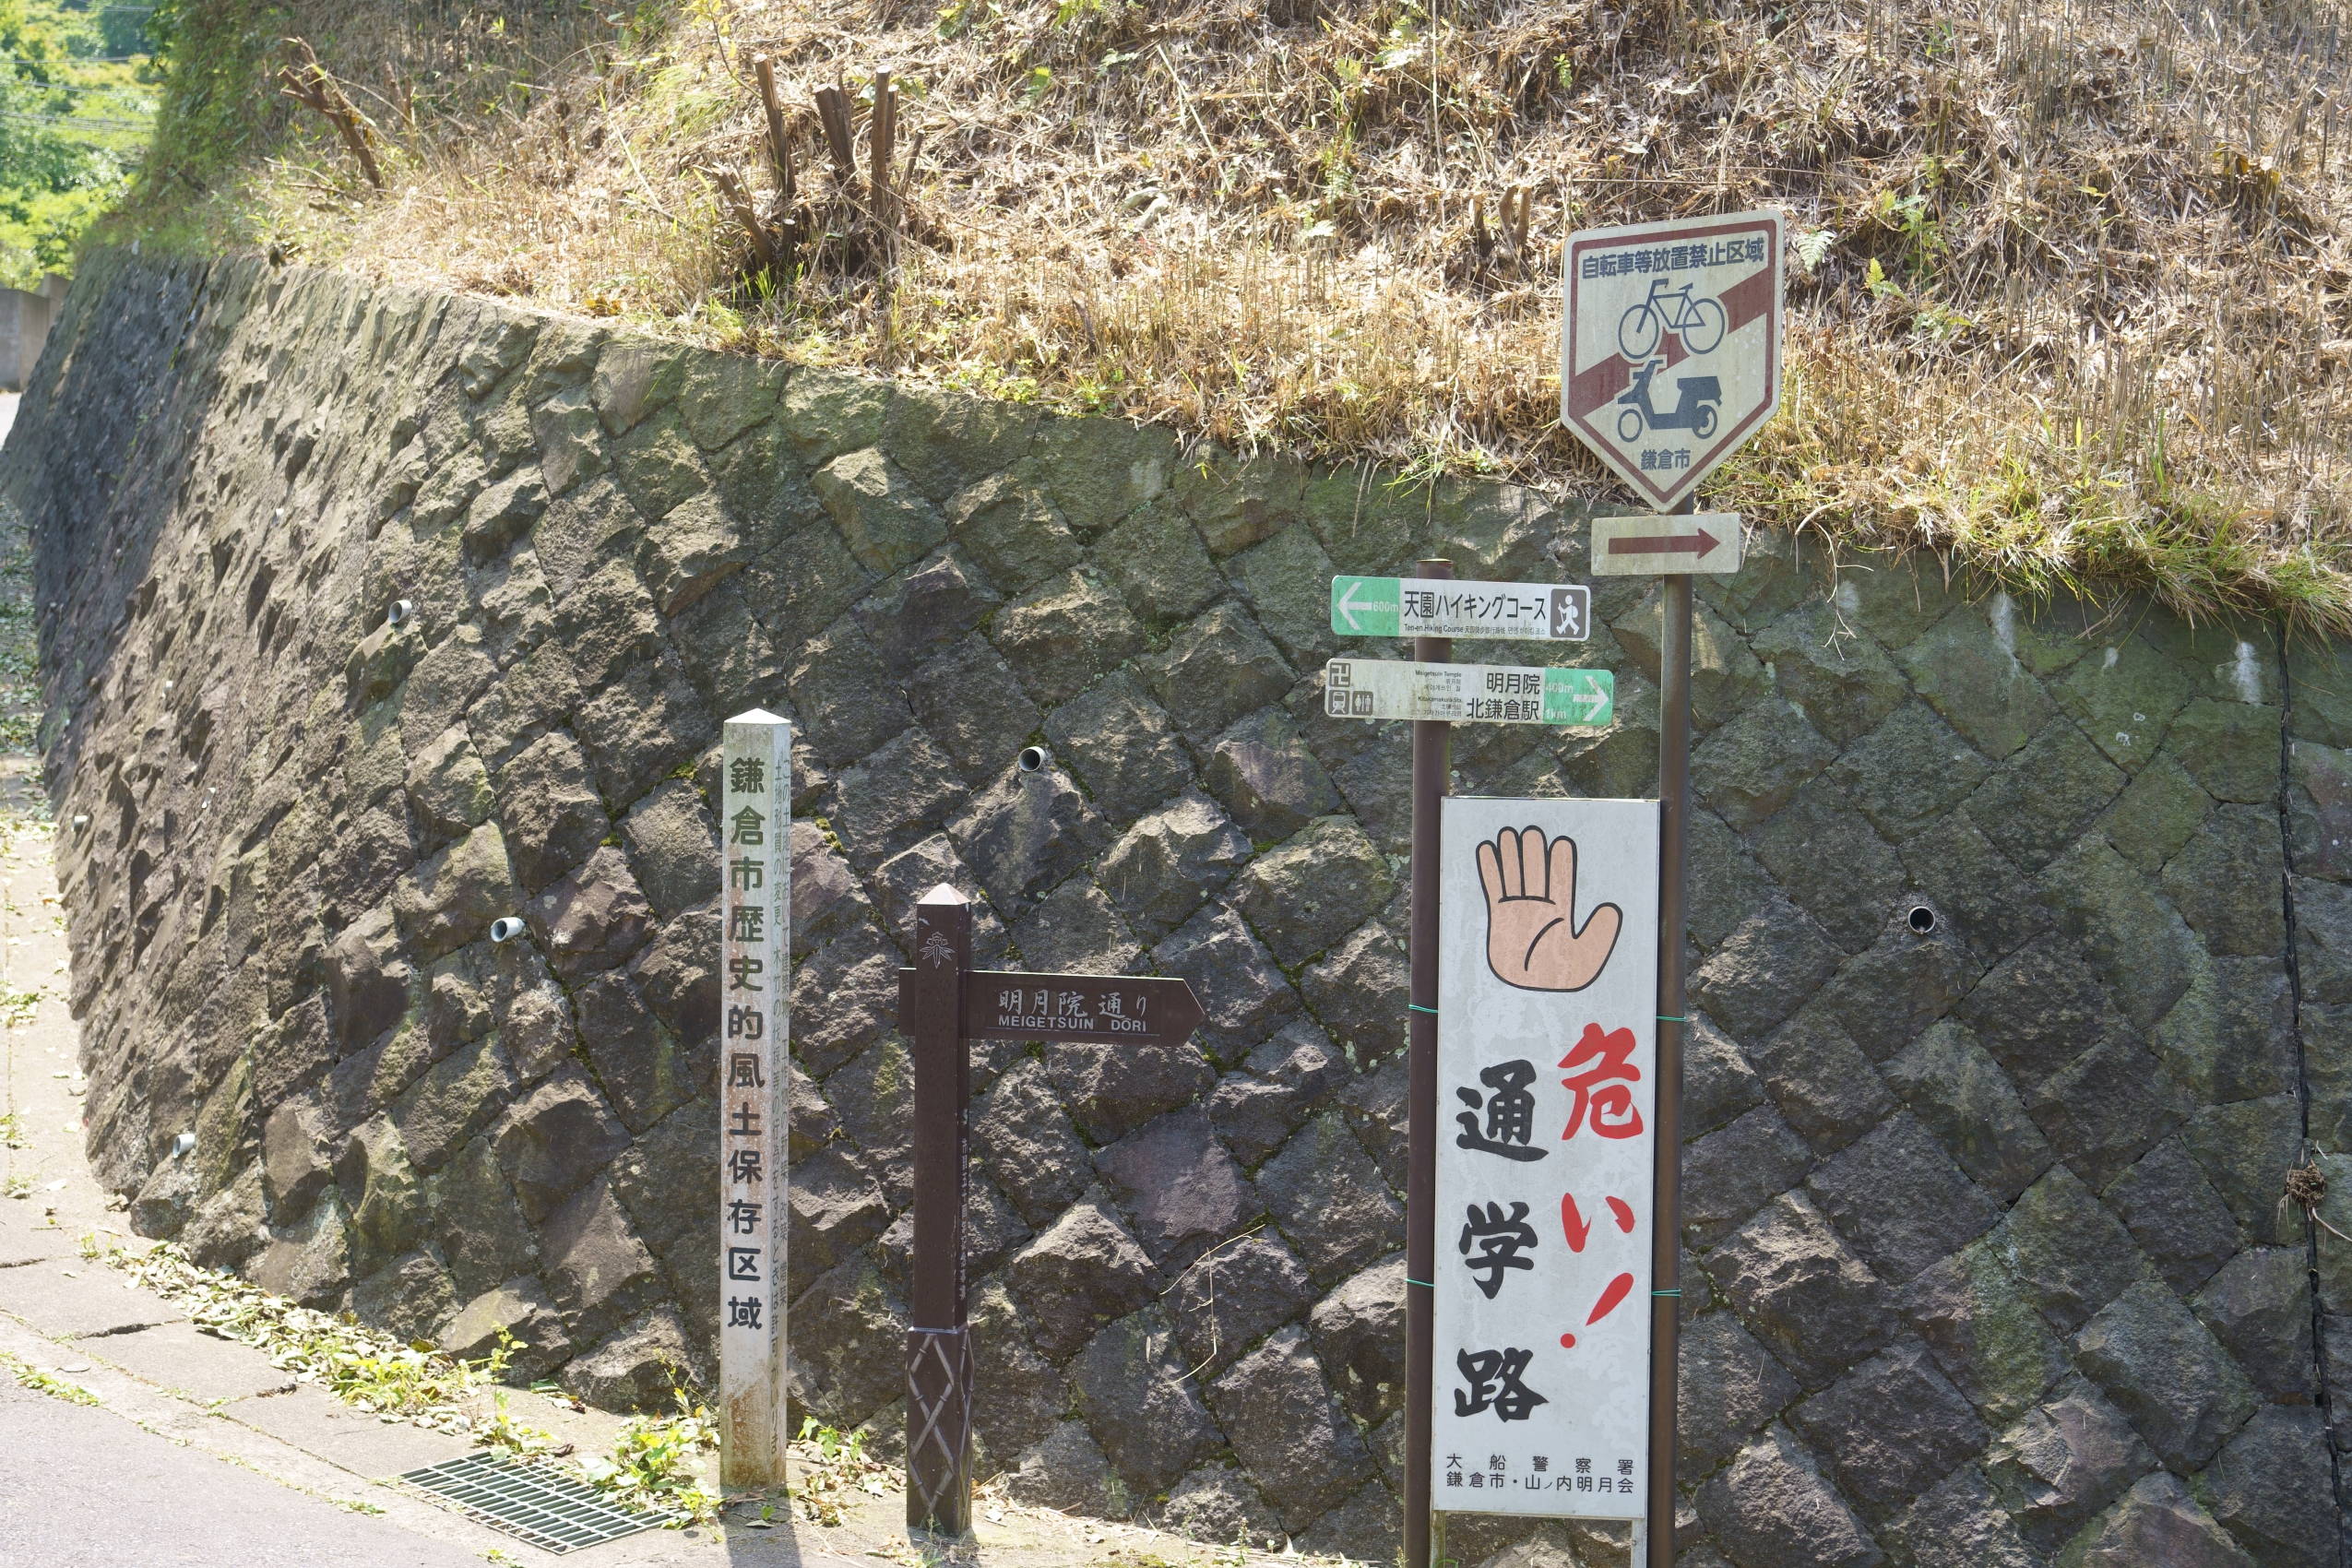 Climb up from Myogetsuin and follow the sign straight ahead.